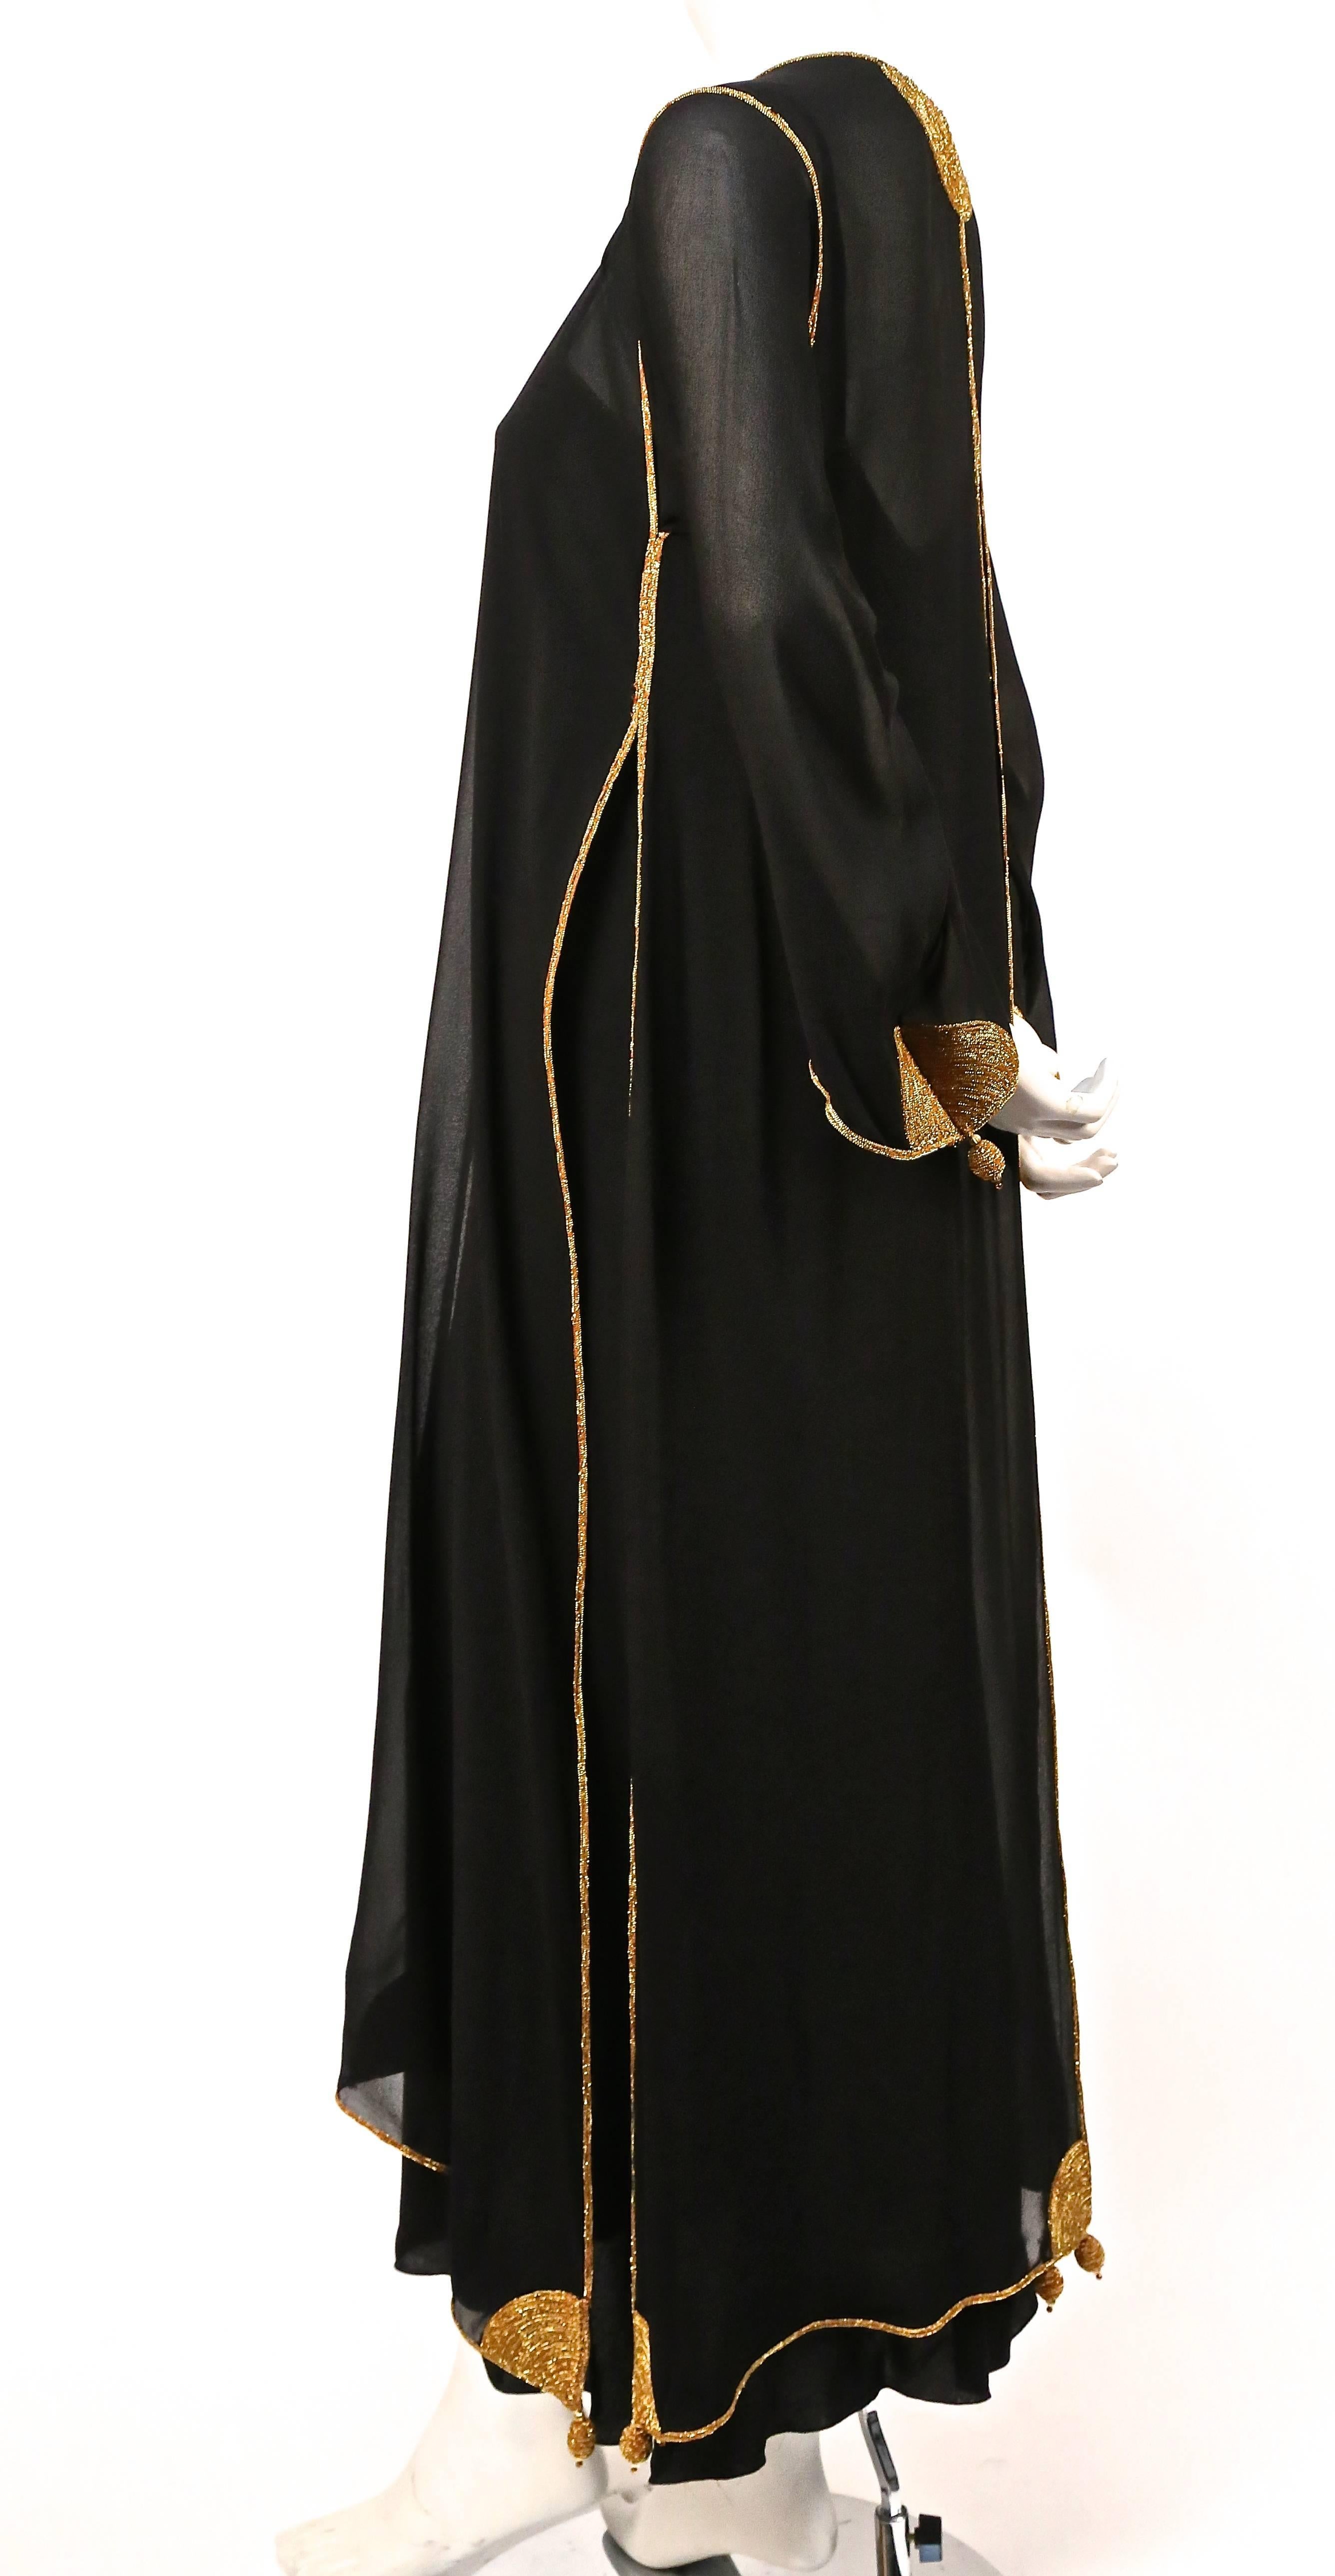 Jet black silk dress and kaftan jacket with decorative gold trim designed by Karl Lagerfeld for Chloe dating to the 1970's. Best fits a US 4-6. Approximate measurements (dress): bust 34